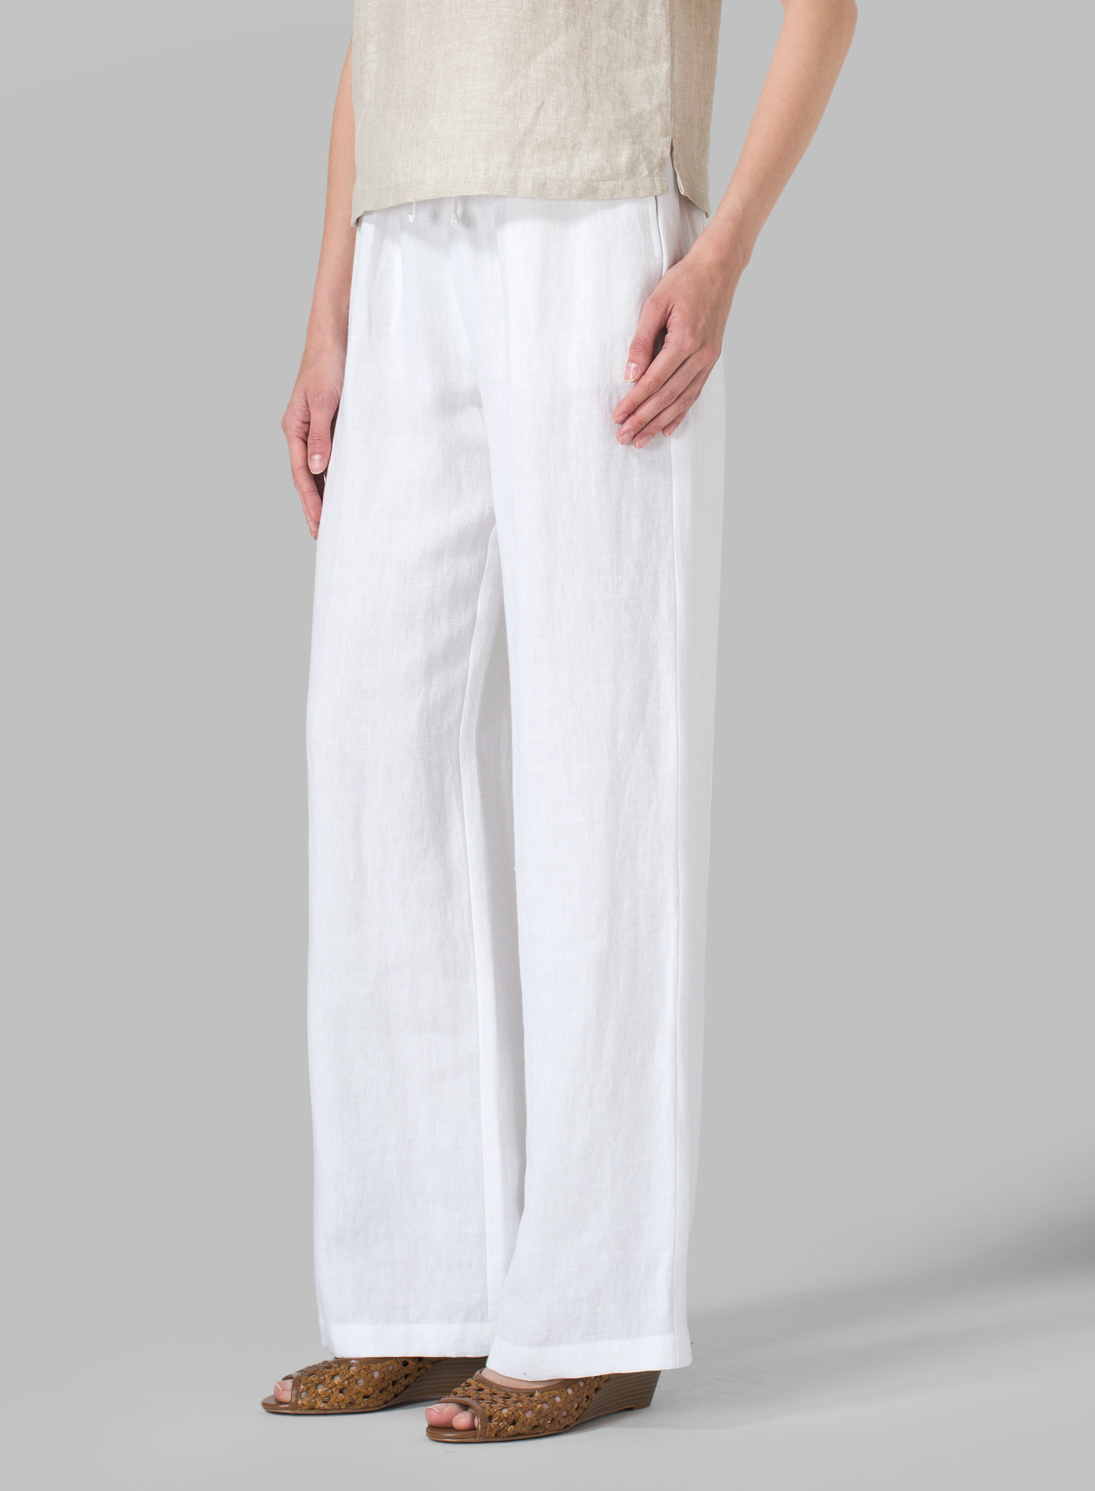 Linen Long Straight Pull-On Pants - Plus Size